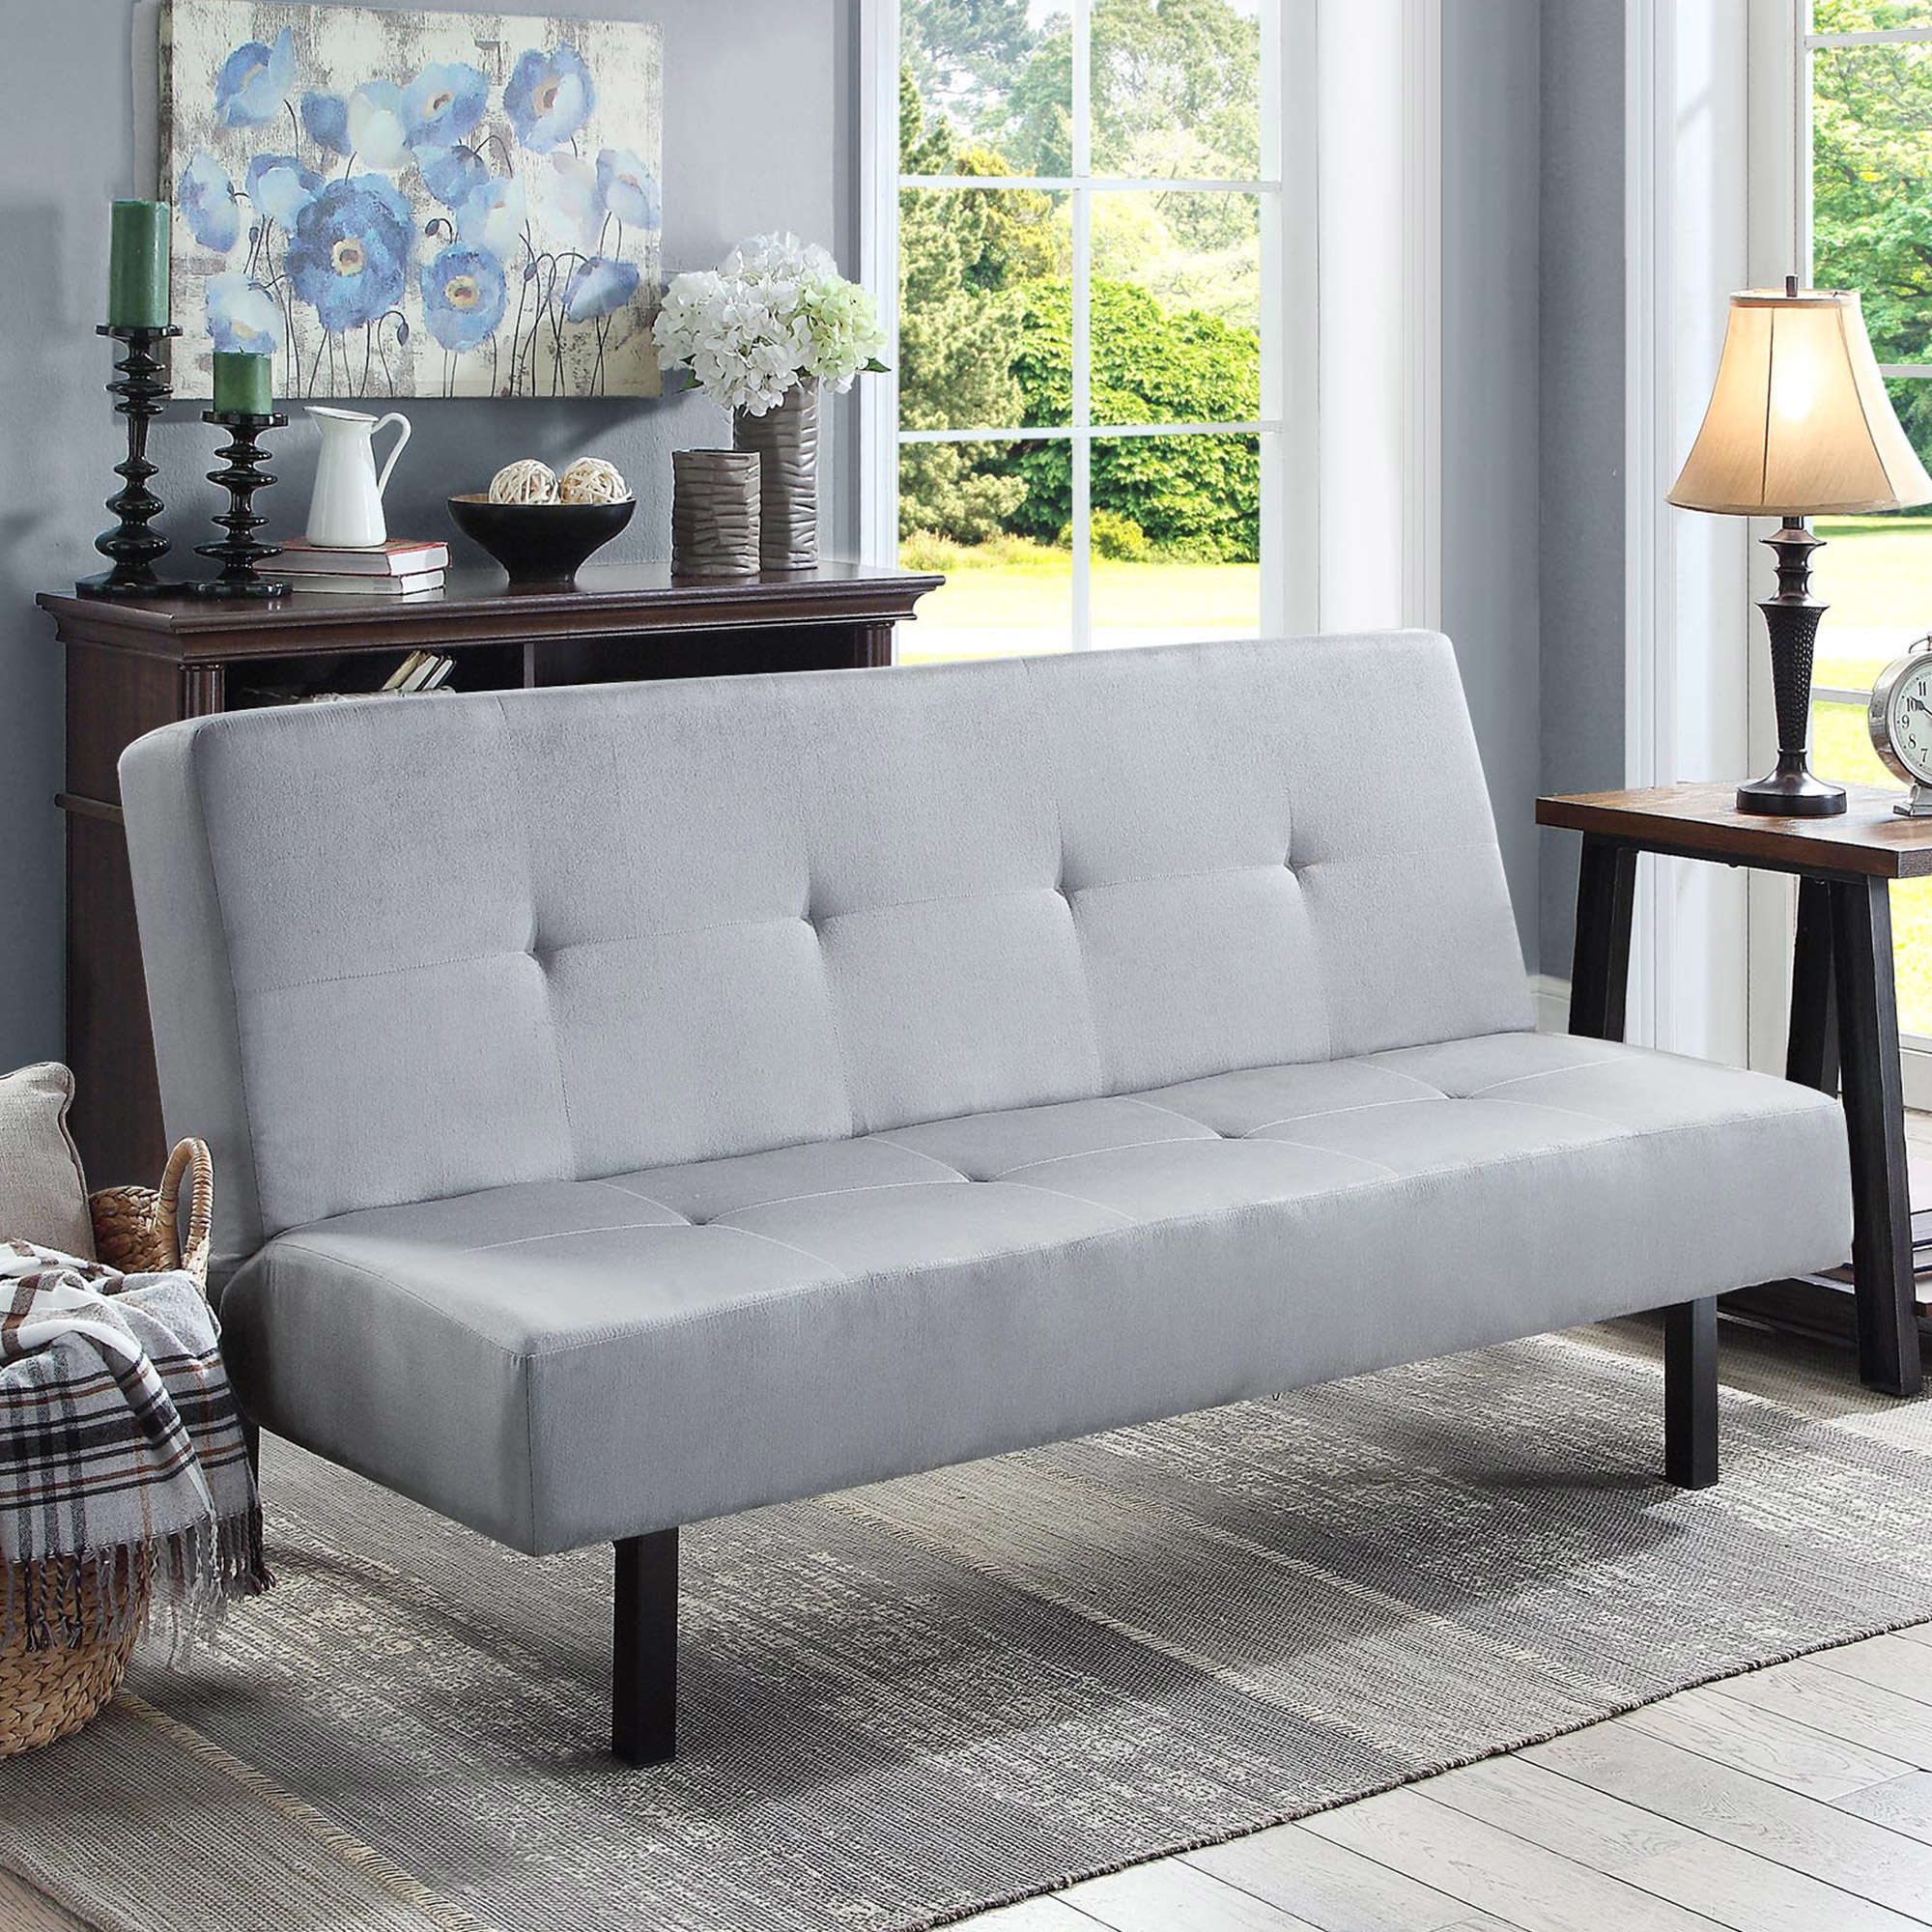 Mainstays 68? 3-Position Tufted Futon, Gray - image 1 of 6